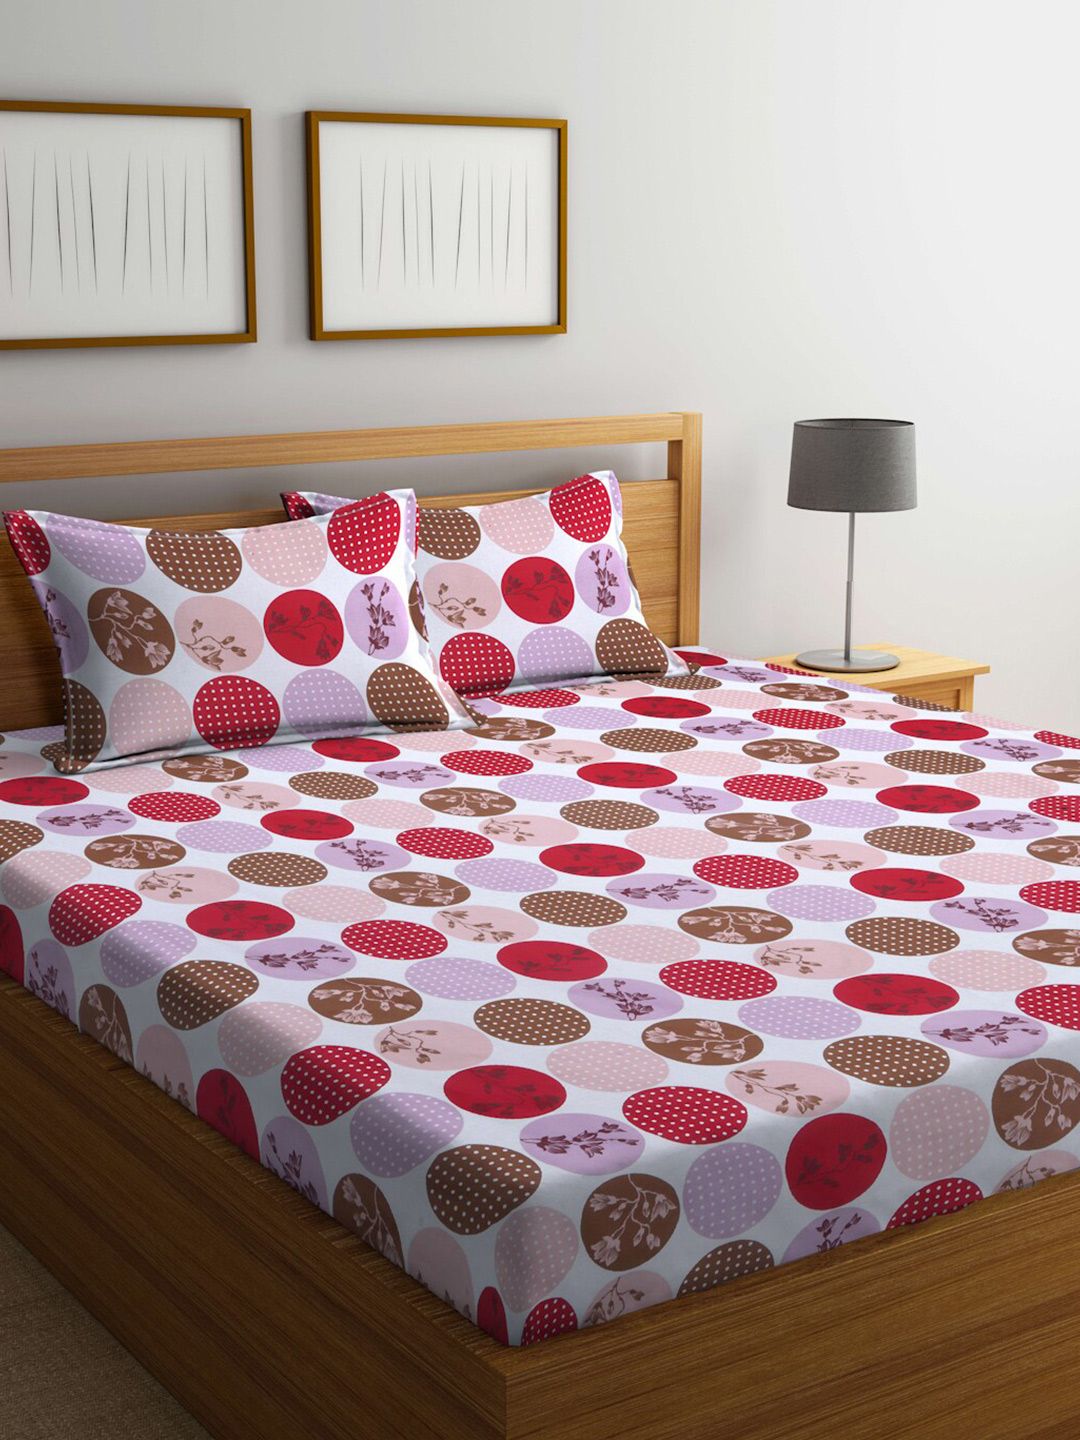 BOMBAY DYEING Brown & Red Geometric 120 TC Cotton King Bedsheet with 2 Pillow Covers Price in India